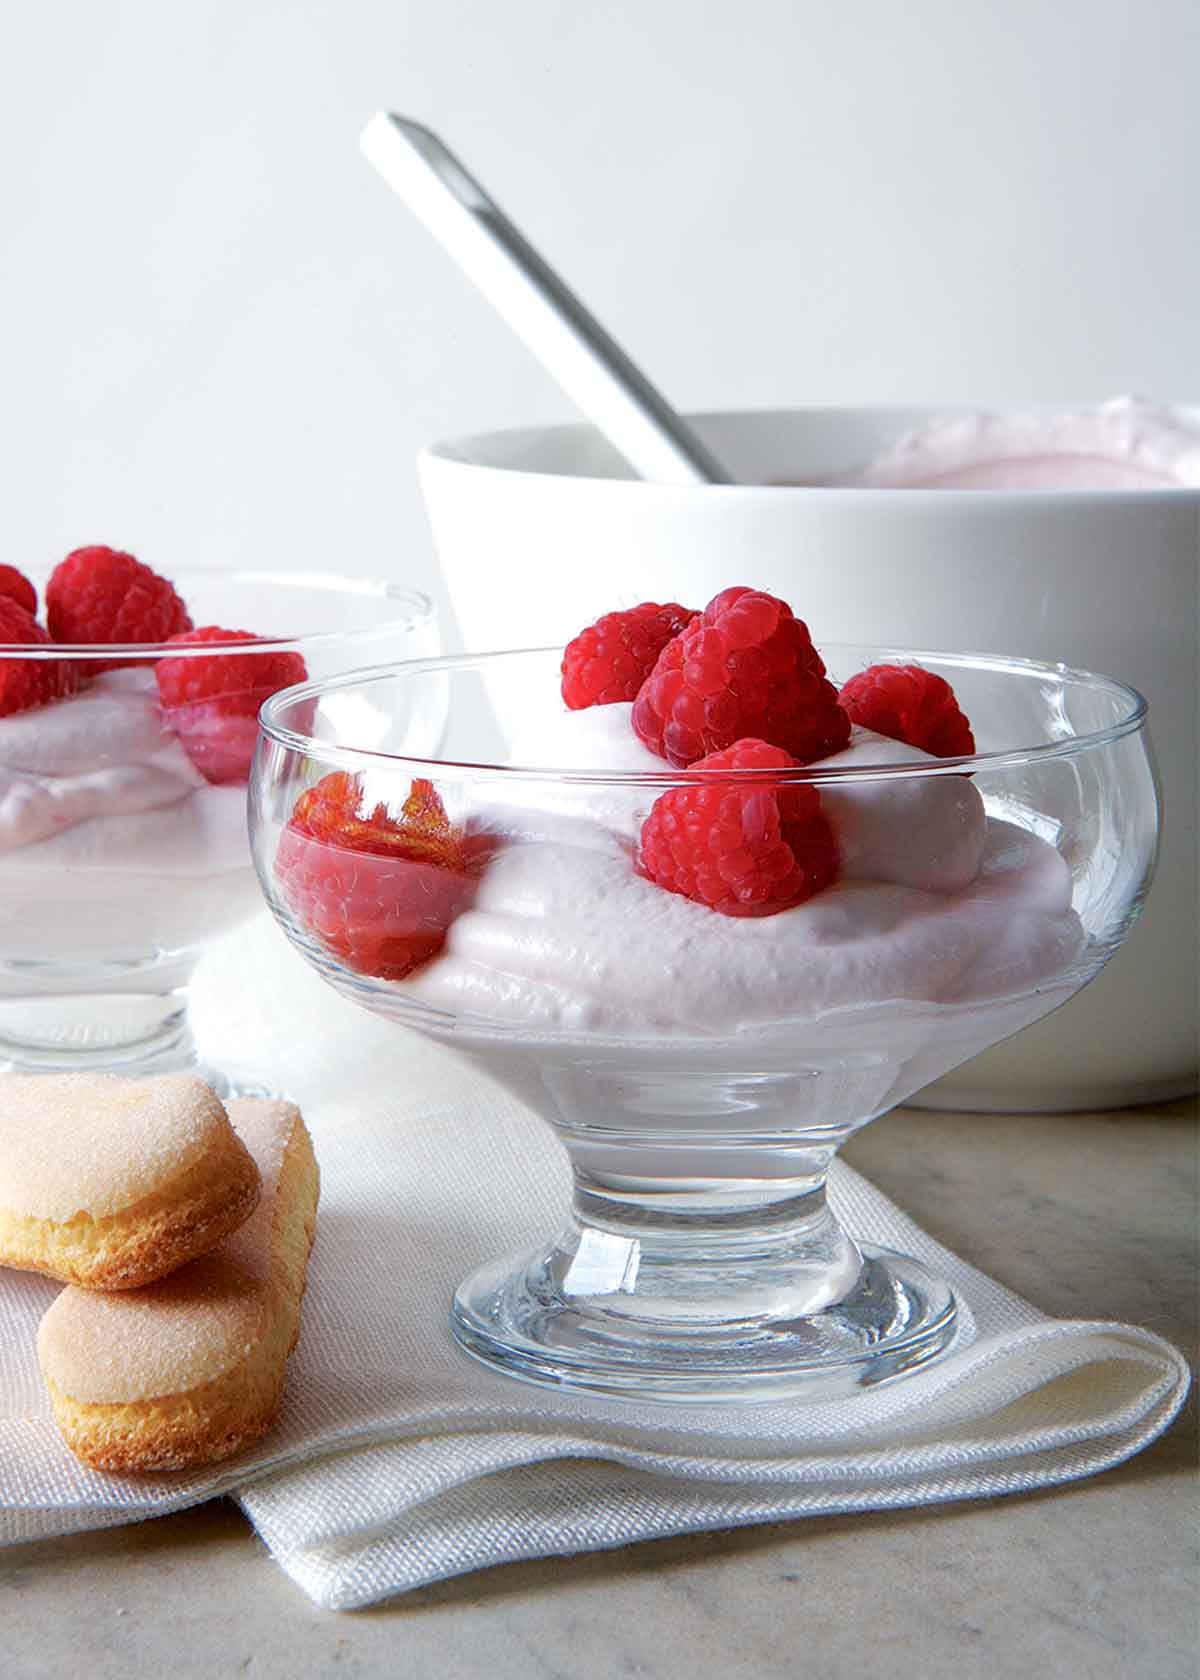 Two parfait-style serving dishes filled with raspberry fool, and topped with fresh raspberries.